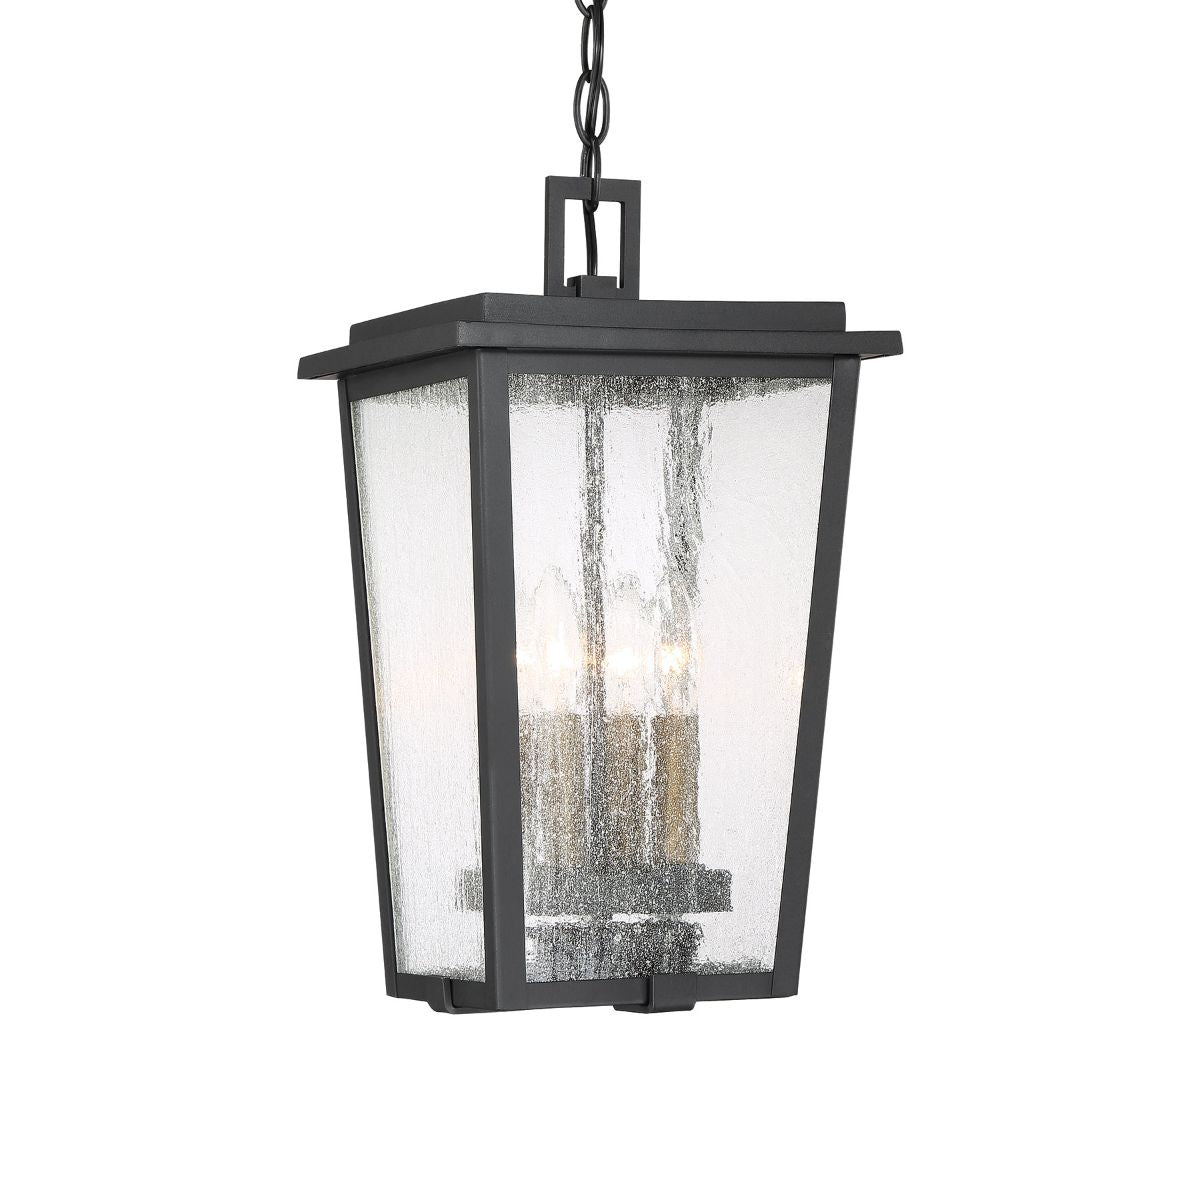 Cantebury 4 lights 9 in. Outdoor Hanging Lantern Black & Gold finish